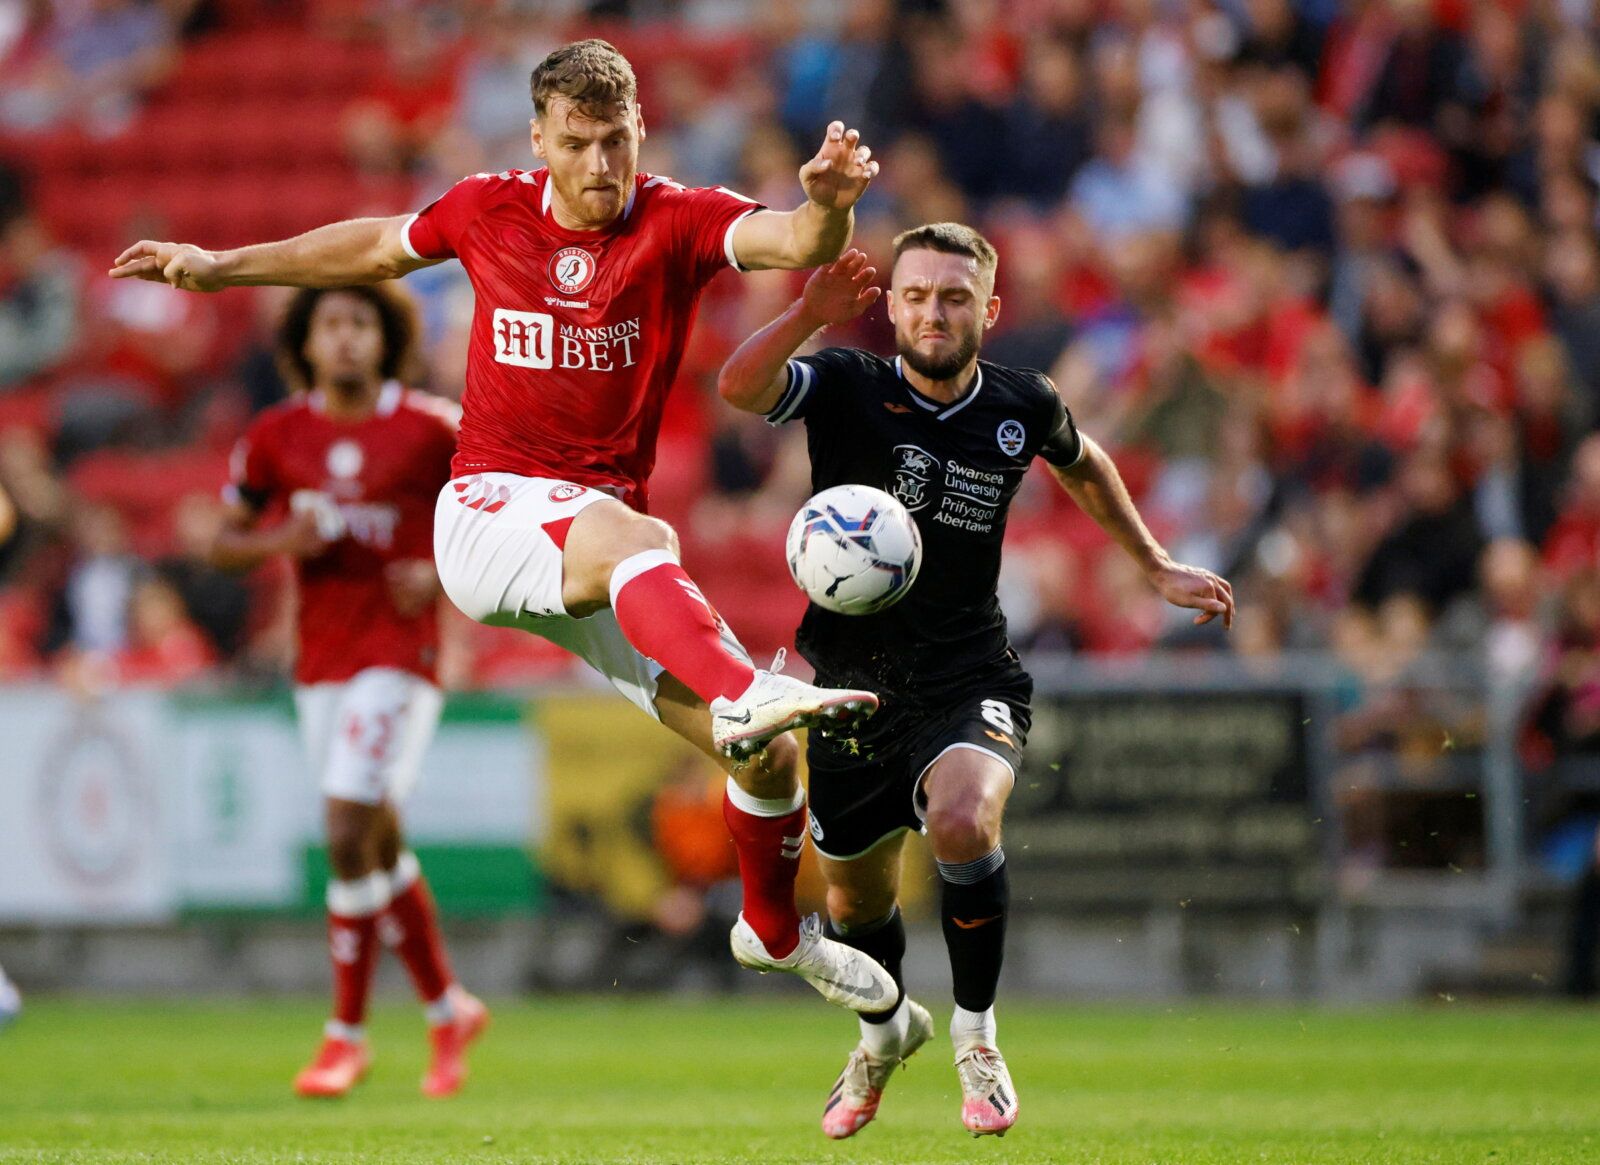 Soccer Football - Championship - Bristol City v Swansea City - Ashton Gate Stadium, Bristol, Britain - August 20, 2021  Bristol City’s Chris Martin in action with Swansea City's Matt Grimes  Action Images/John Sibley  EDITORIAL USE ONLY. No use with unauthorized audio, video, data, fixture lists, club/league logos or "live" services. Online in-match use limited to 75 images, no video emulation. No use in betting, games or single club/league/player publications.  Please contact your account repre